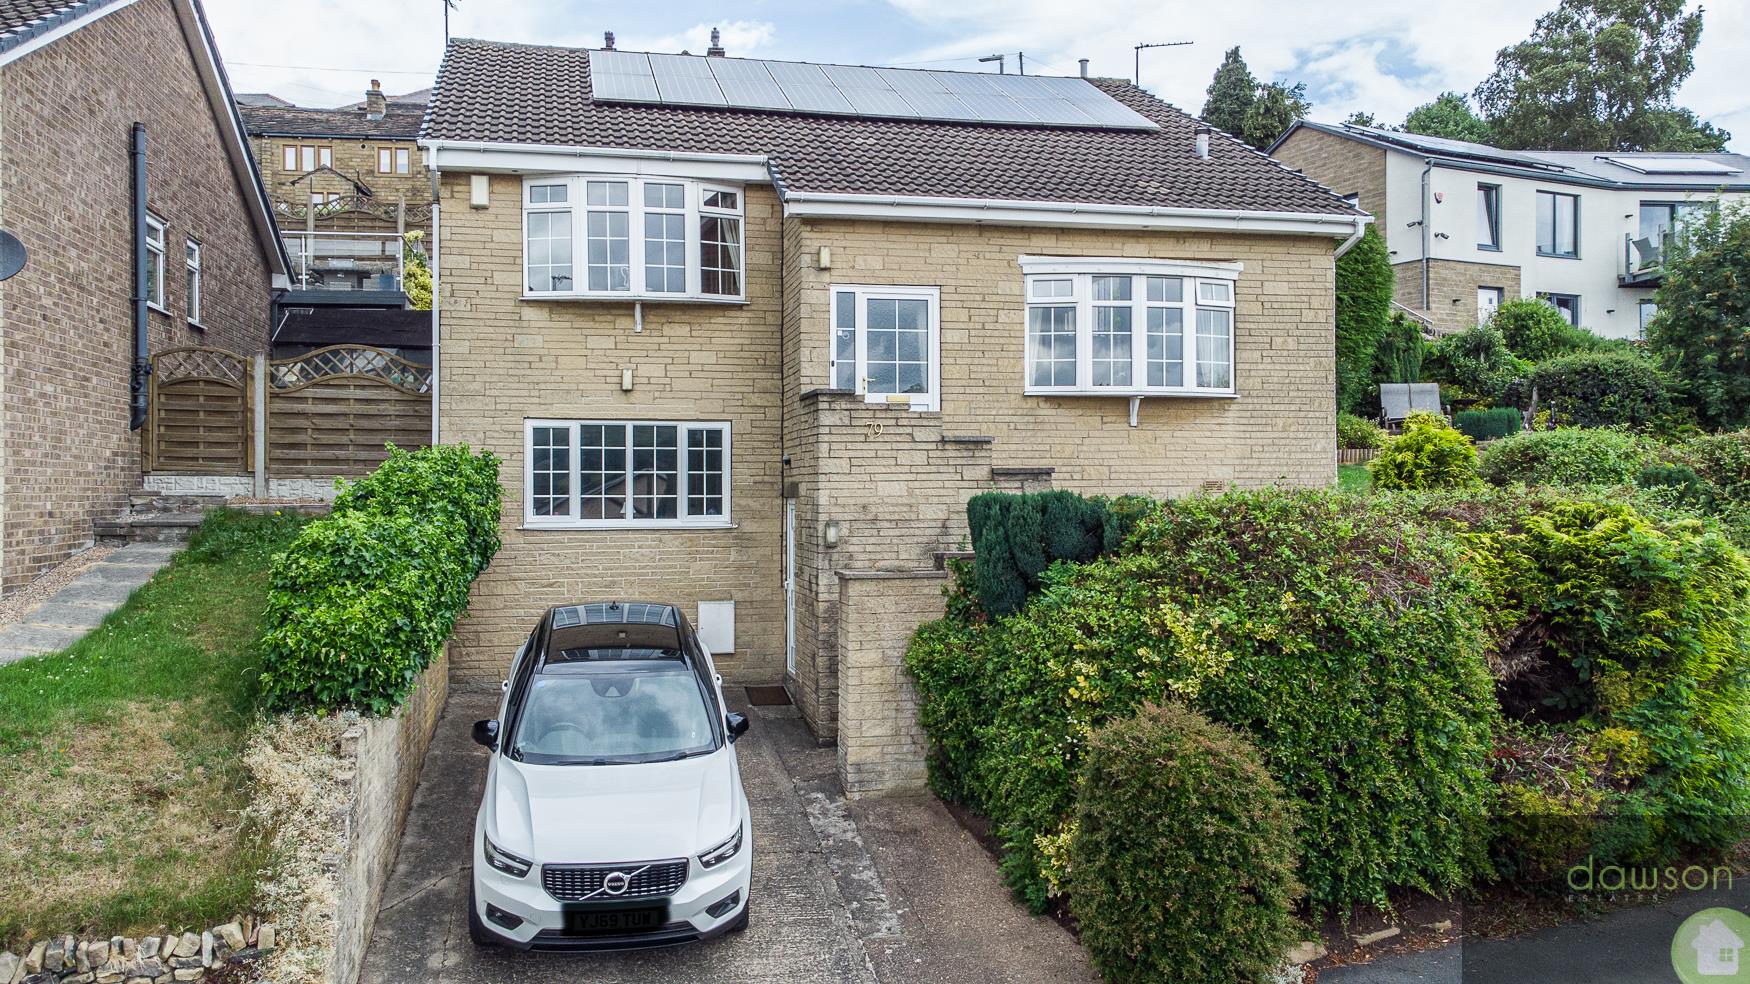 3 bed detached house for sale in High Meadows, Halifax, HX4 